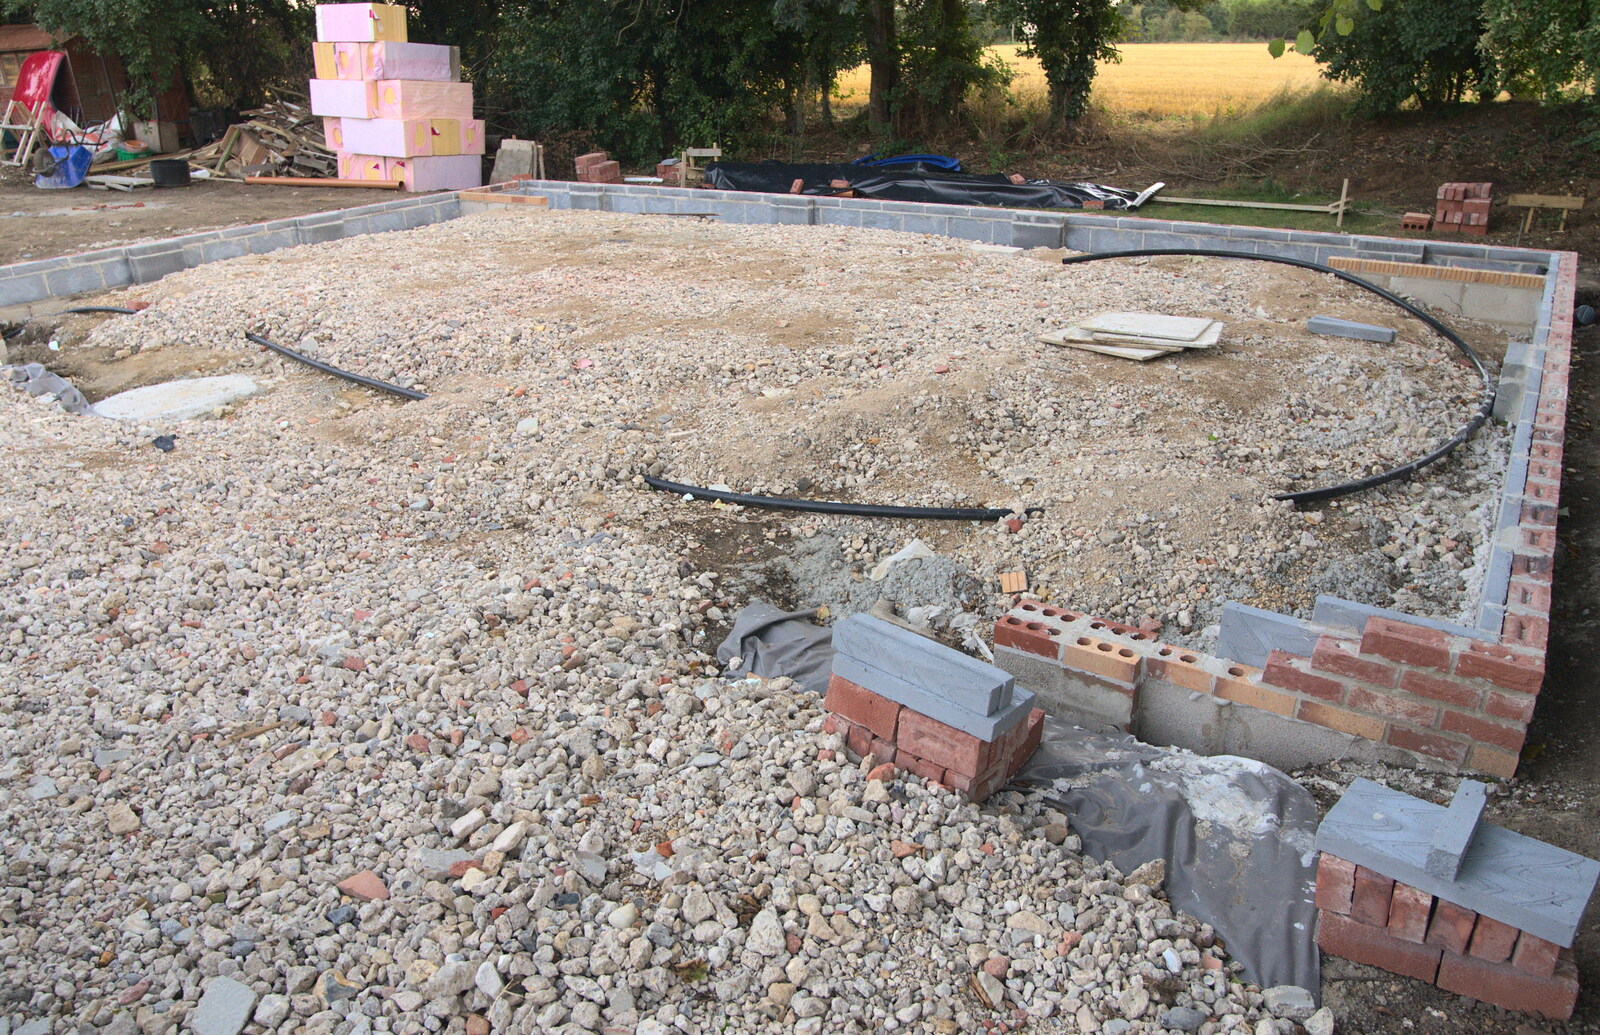 The brick bas of the garage appears from Bressingham Gardens, and Building Progress, Brome, Suffolk - 26th August 2013